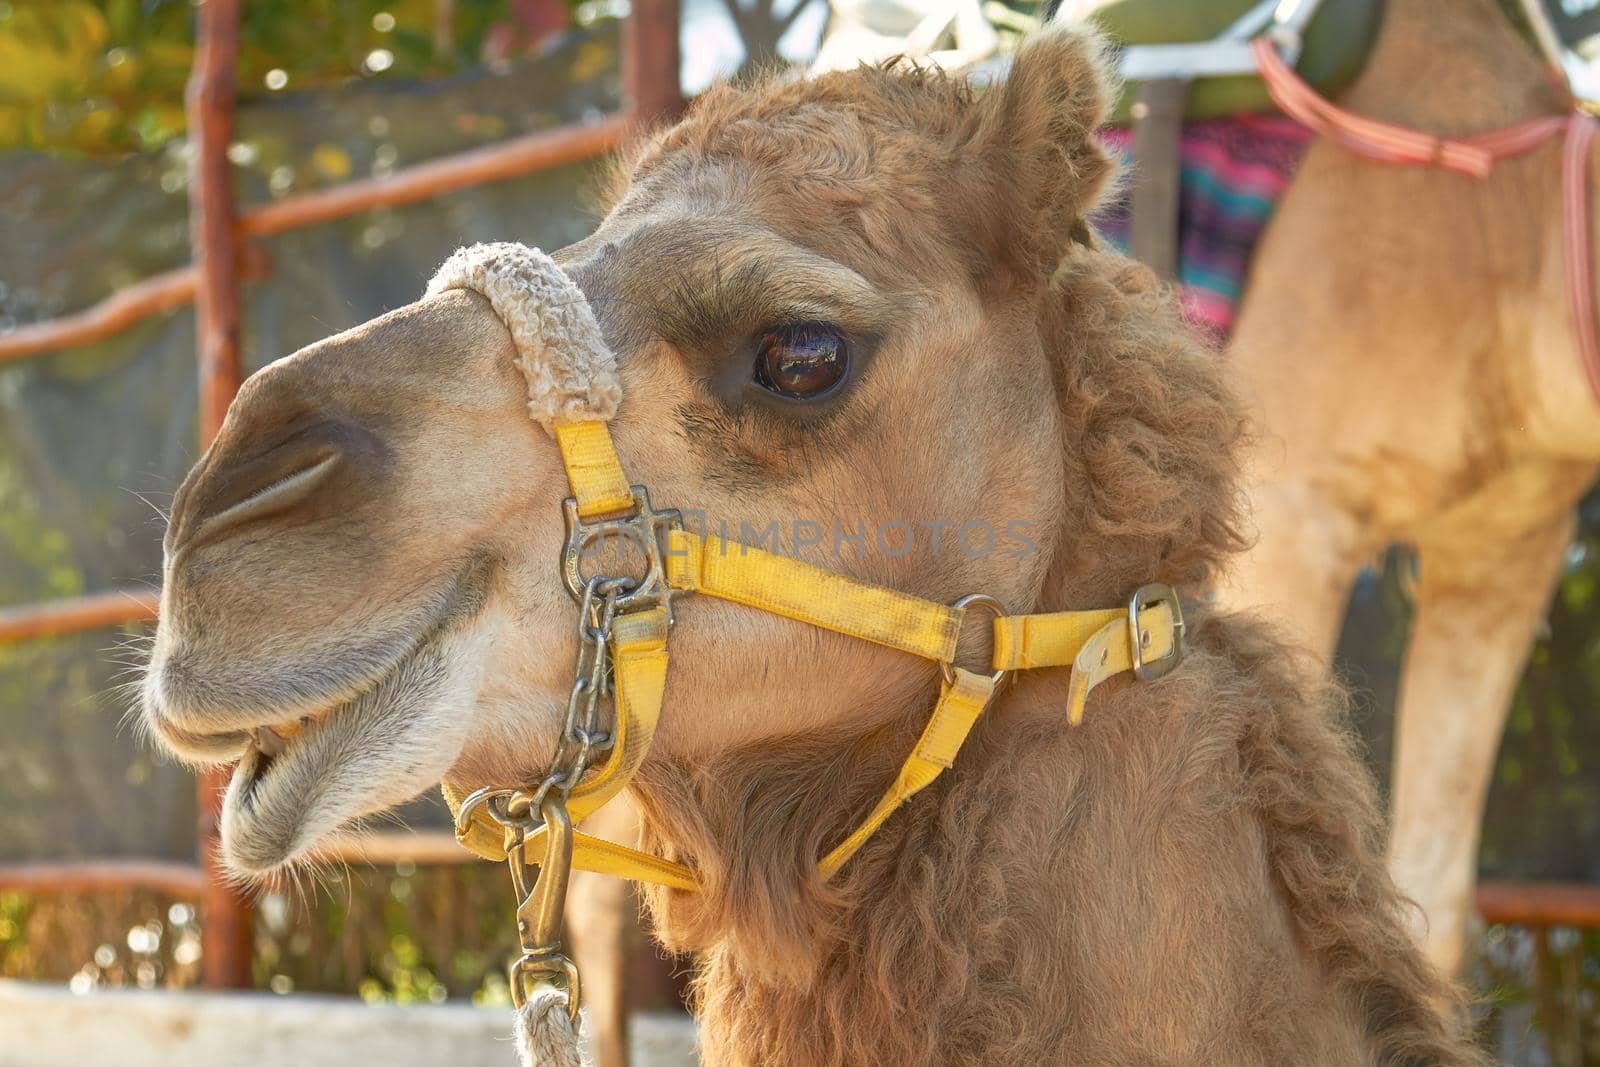 The Facial Expression of a Camel in Cozumel Mexico by wondry